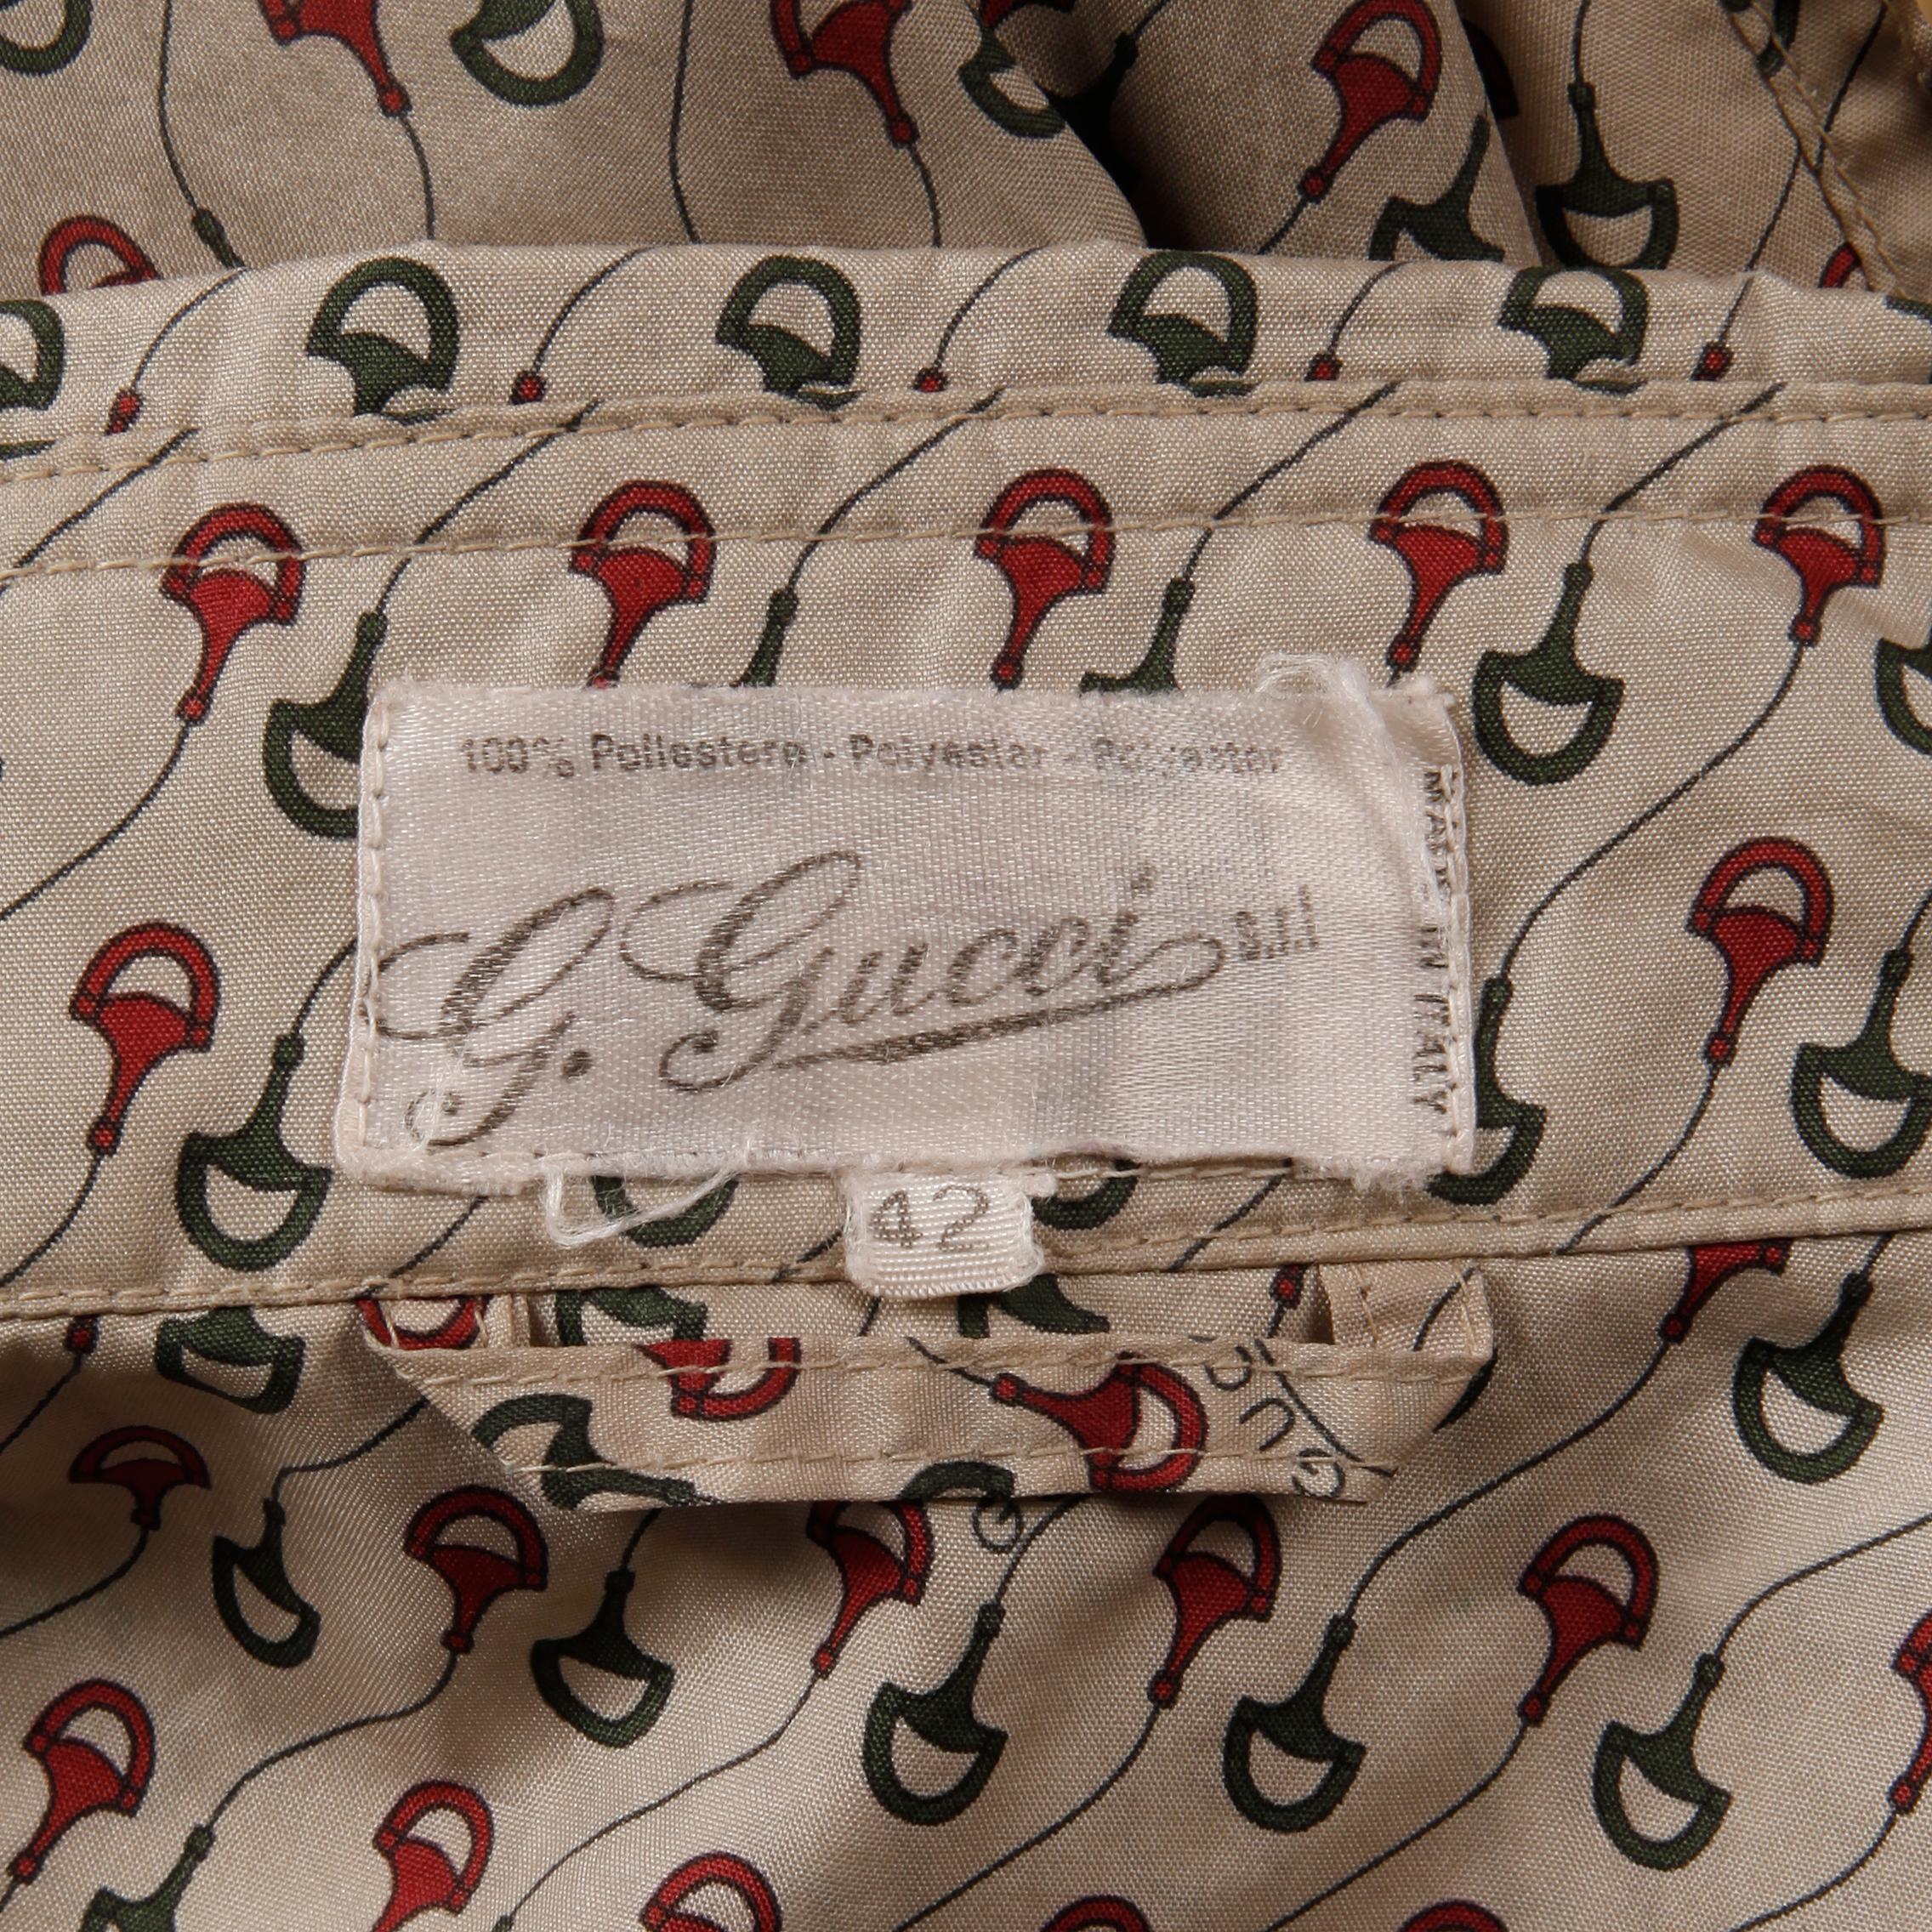 Vintage 1970s Gucci raincoat or duster with iconic Gucci horse bit and monogram print. This would look also look great belted! Unlined with front button closure. Front patch pockets. The marked size is 42 and the coat fits like a modern size